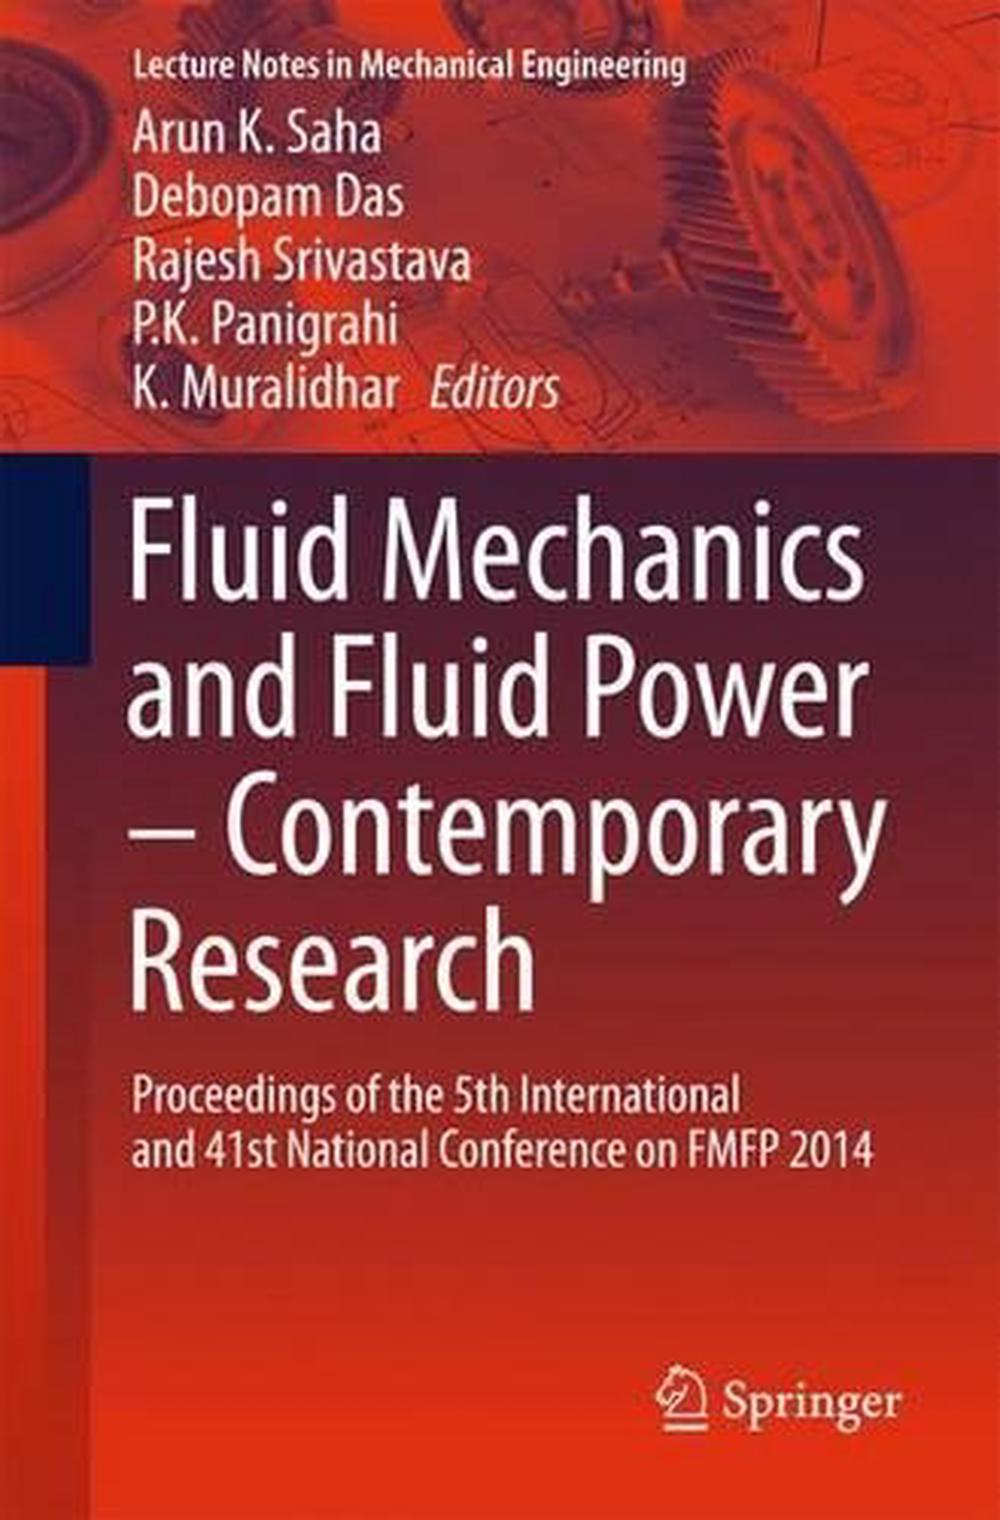 Fluid Mechanics and Fluid Power Contemporary Research Proceedings of